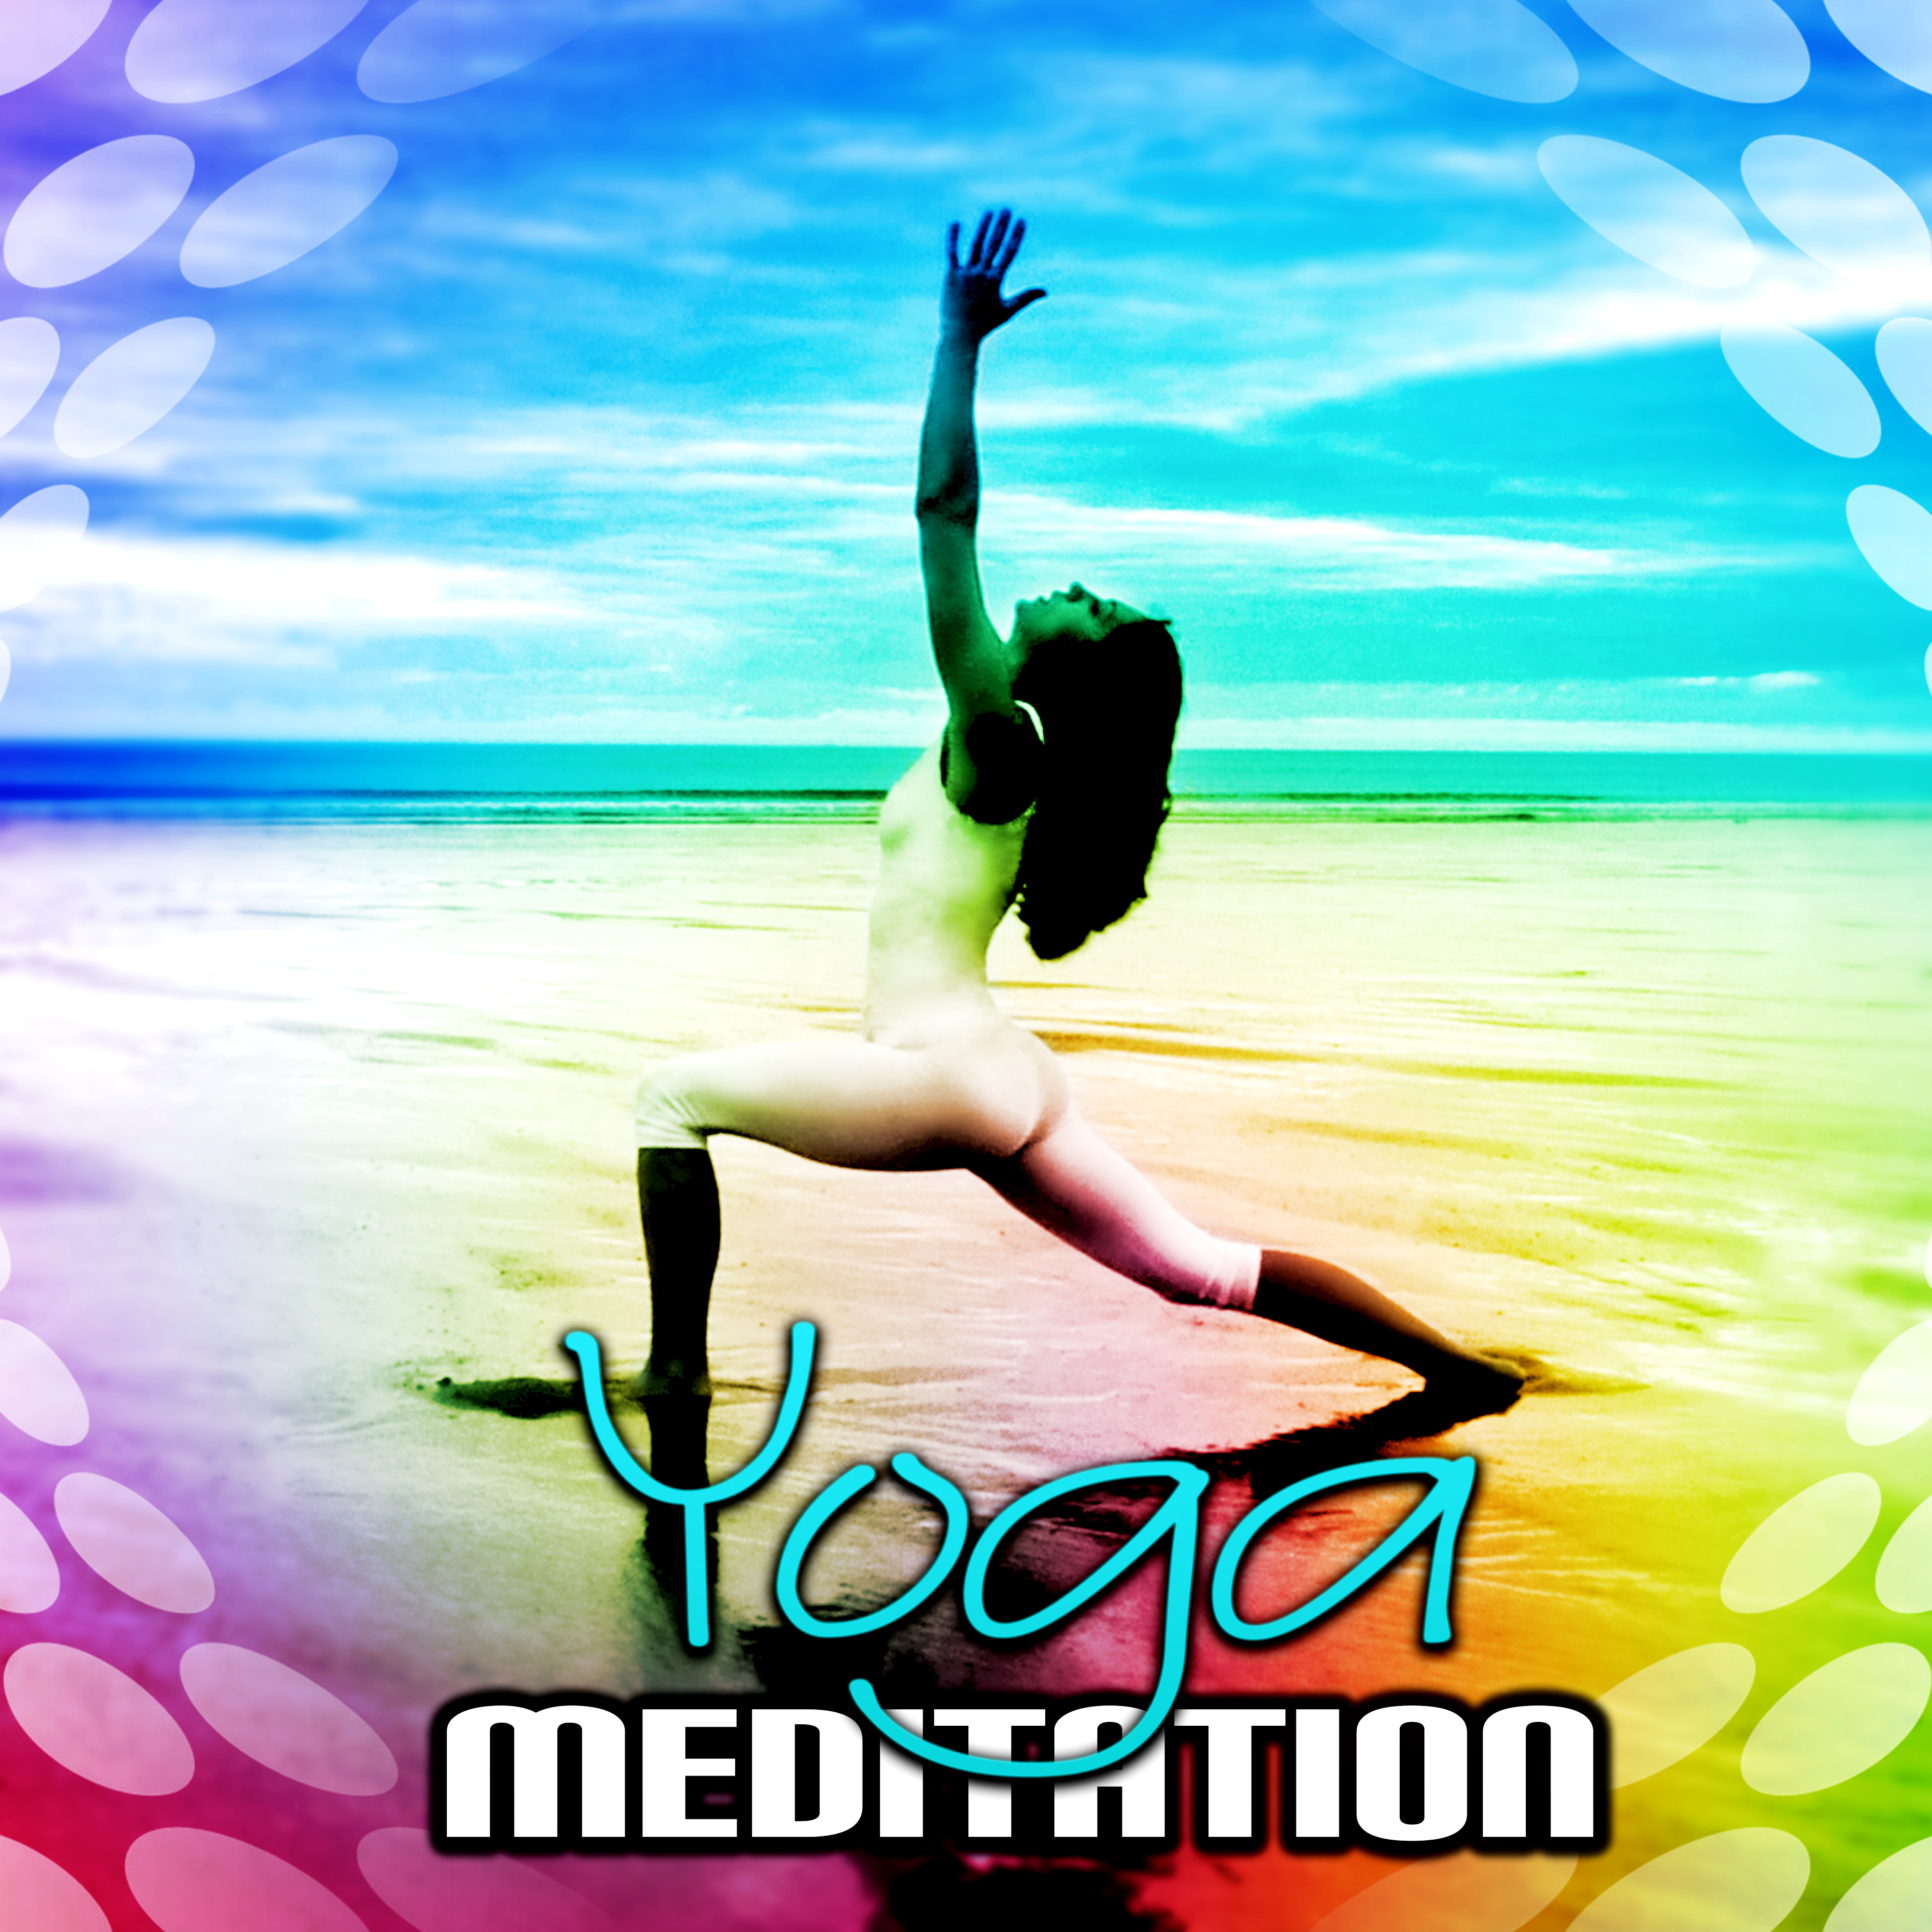 Yoga Meditation - Relaxing Sounds for Healing, Spa, Therapy & Massage, Background Music for Piano & Flute, Ocean Waves & Sounds of Nature